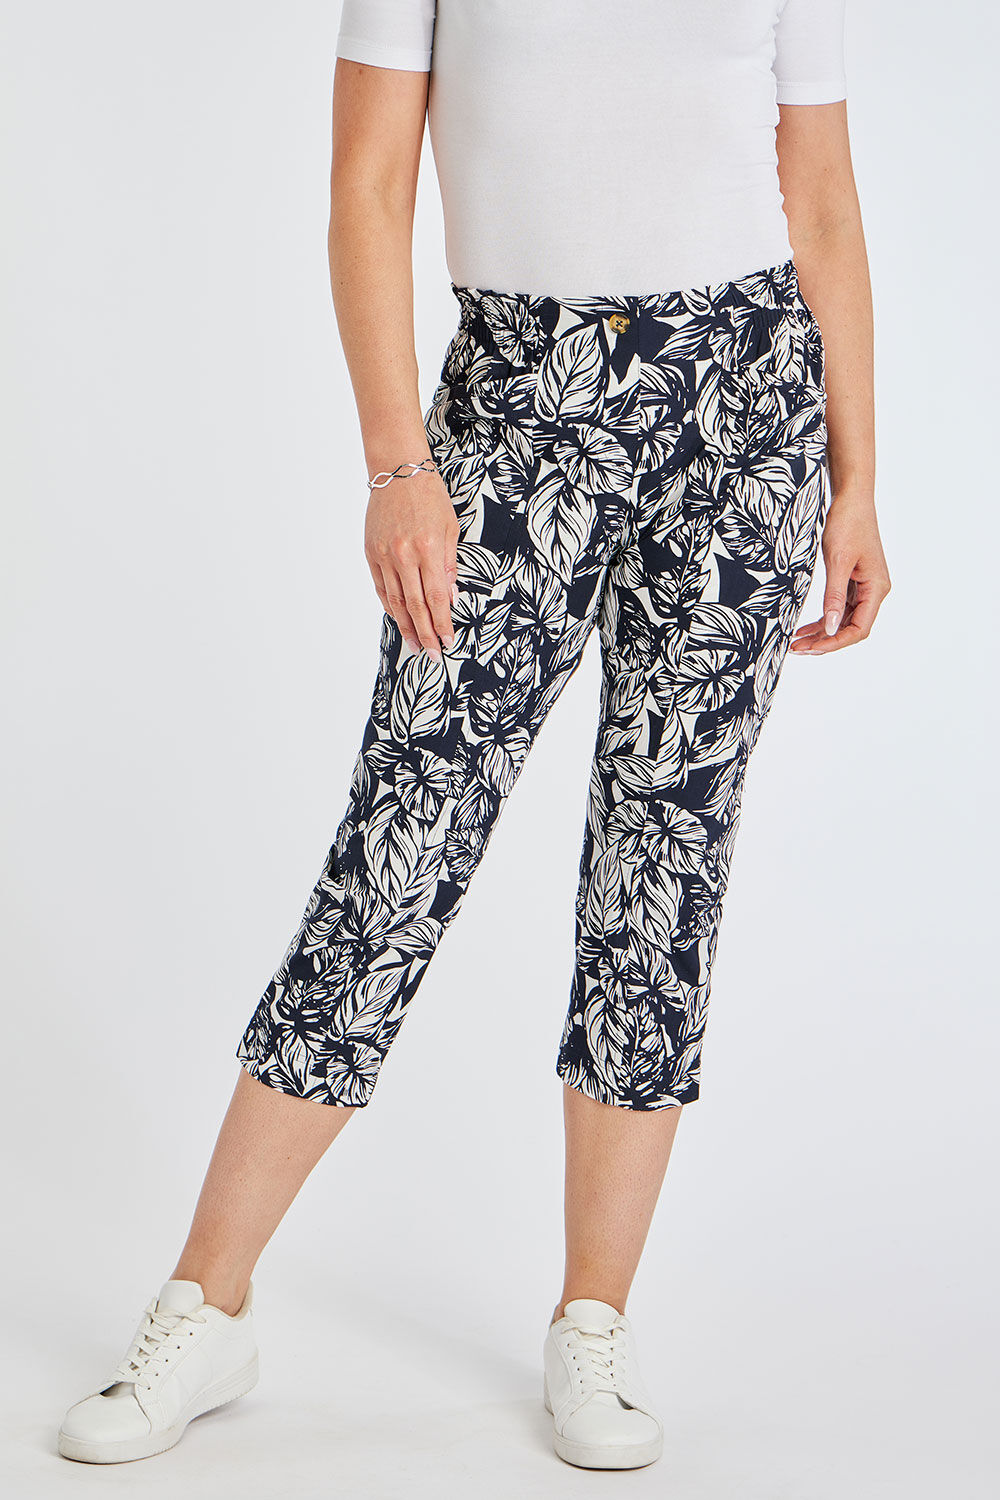 Bonmarche Navy Leaf Print Elasticated Back Essential Cropped Trousers, Size: 20